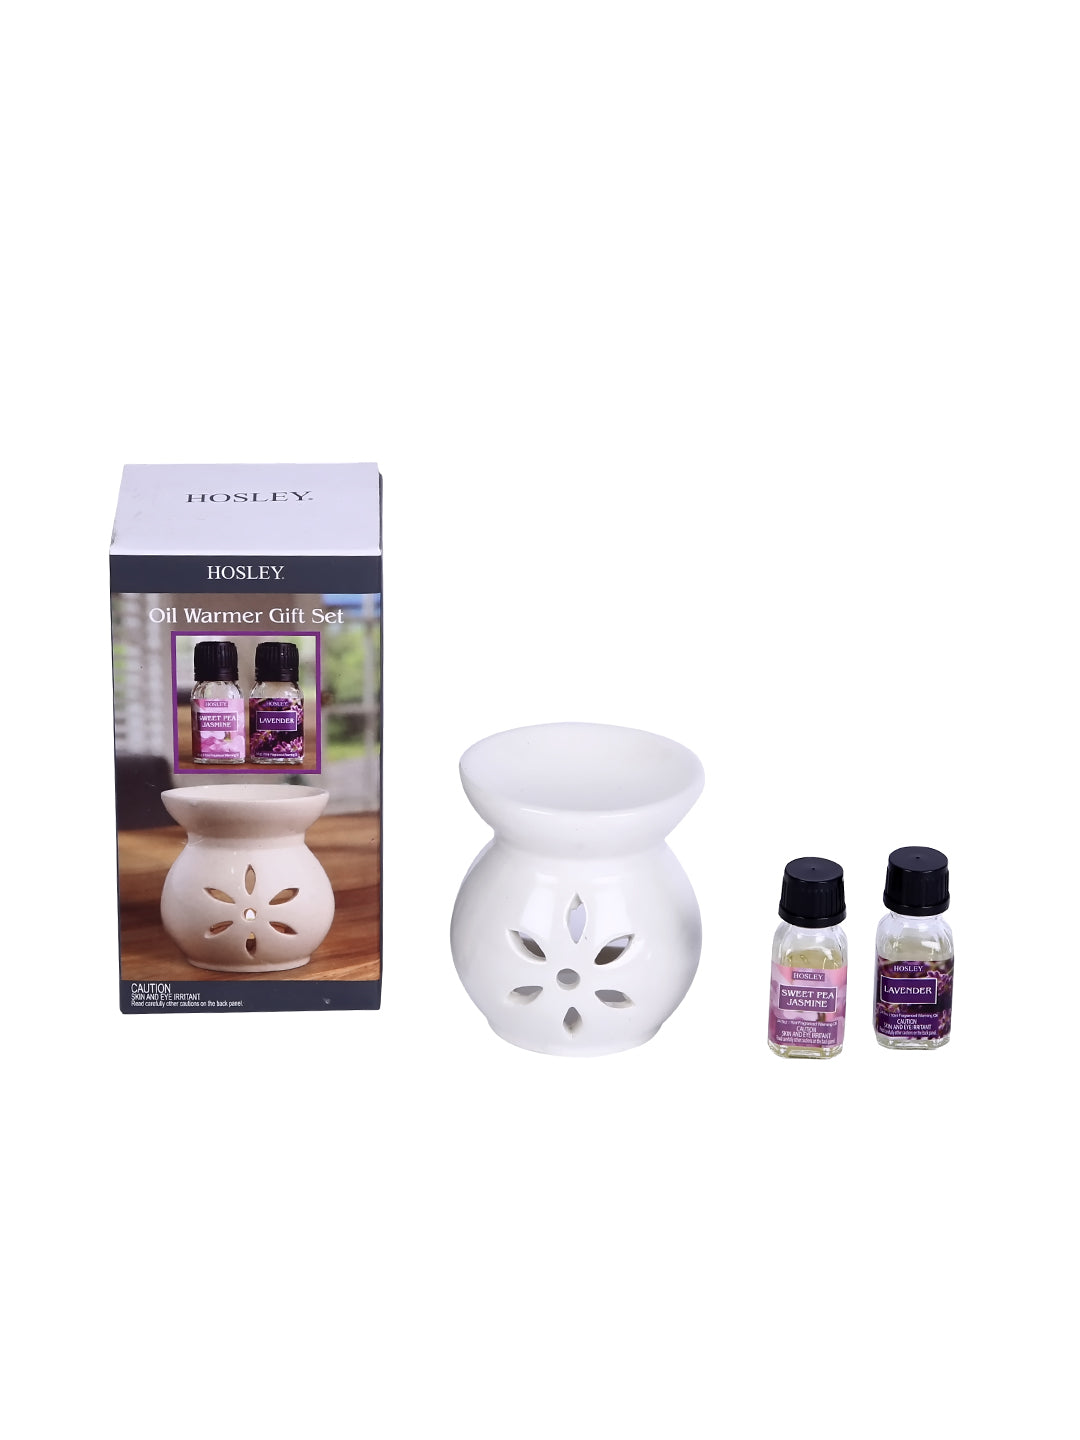 Hosley Ceramic Aroma Oil Warmer/ Oil Diffuser with Oil Bottles and Tealight For Gifting / Home Fragrance